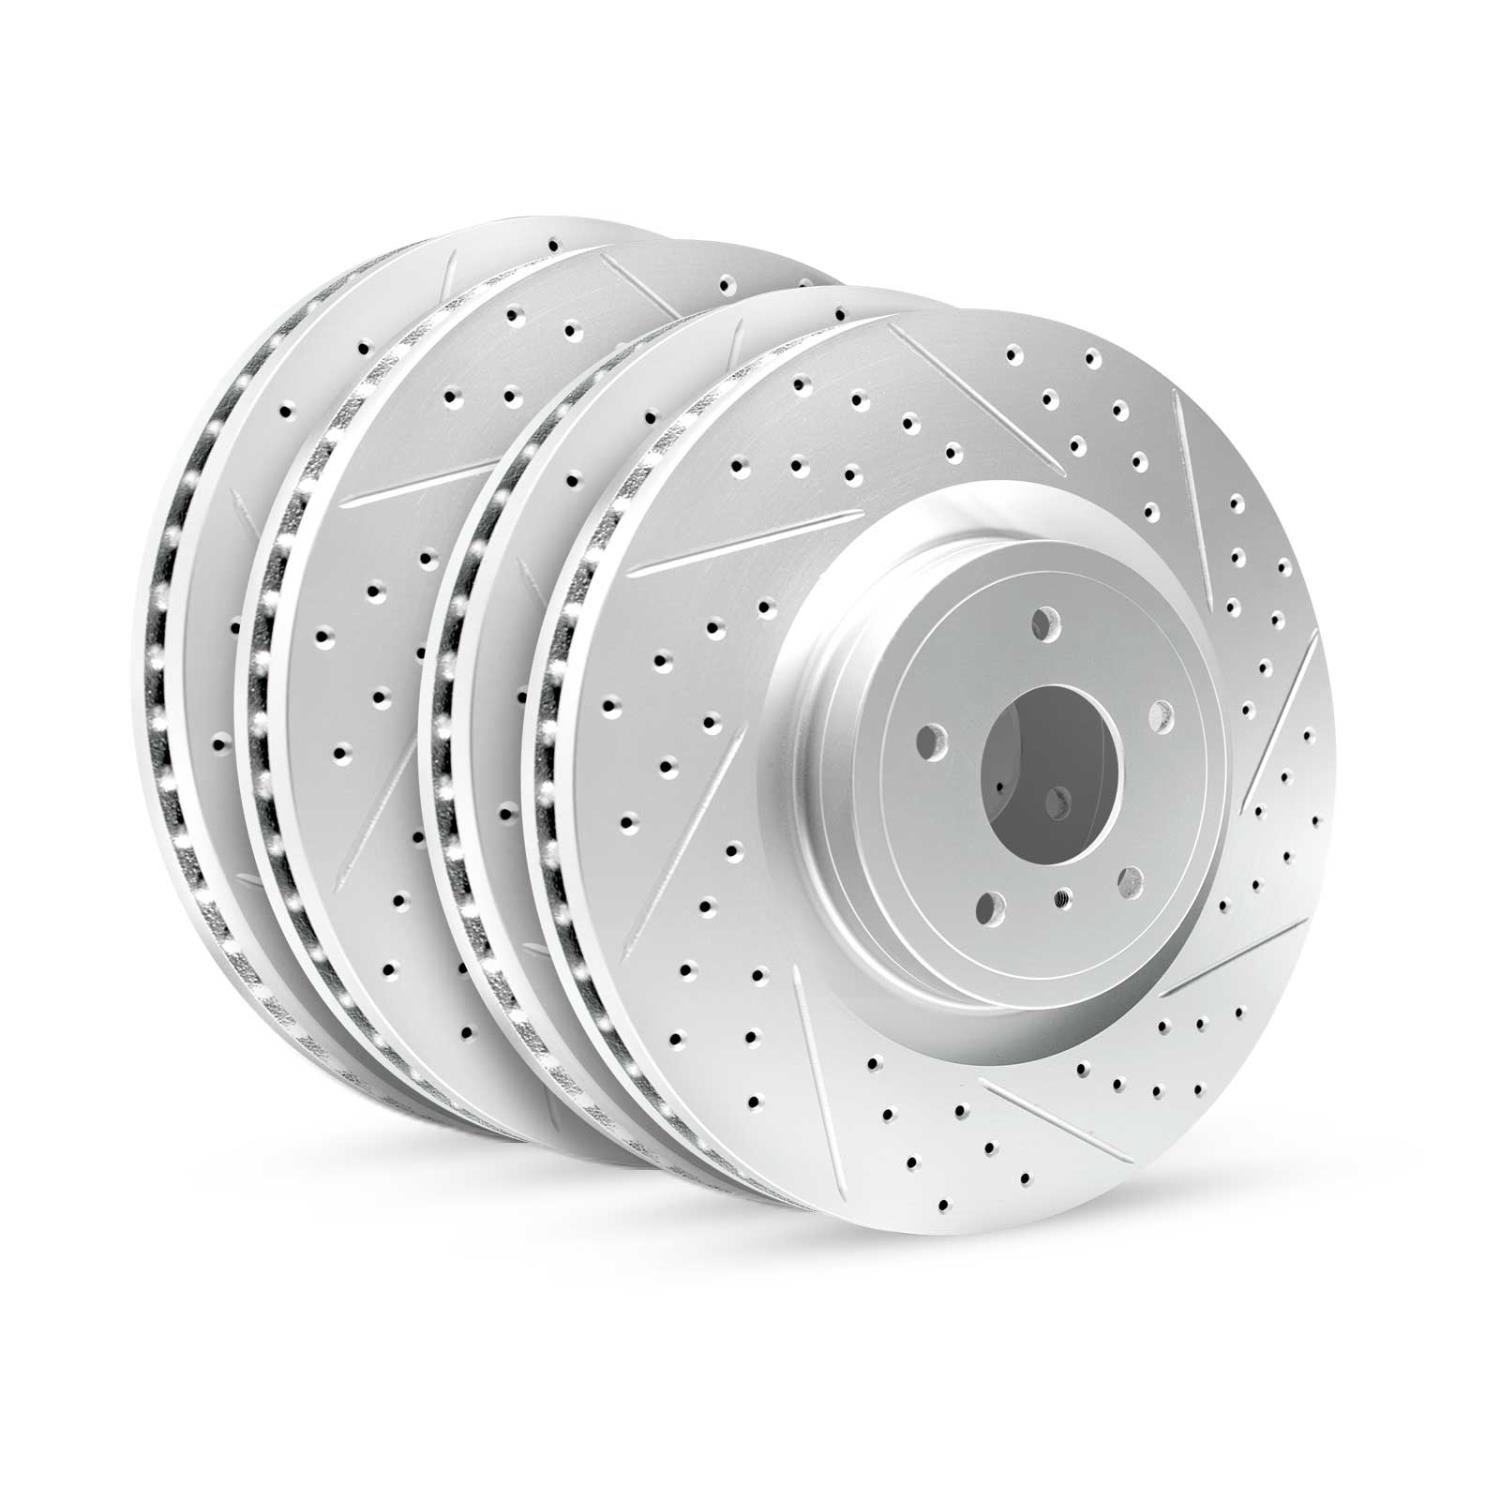 GEO-Carbon Drilled/Slotted Rotors, 2002-2004 Infiniti/Nissan, Position: Front/Rear